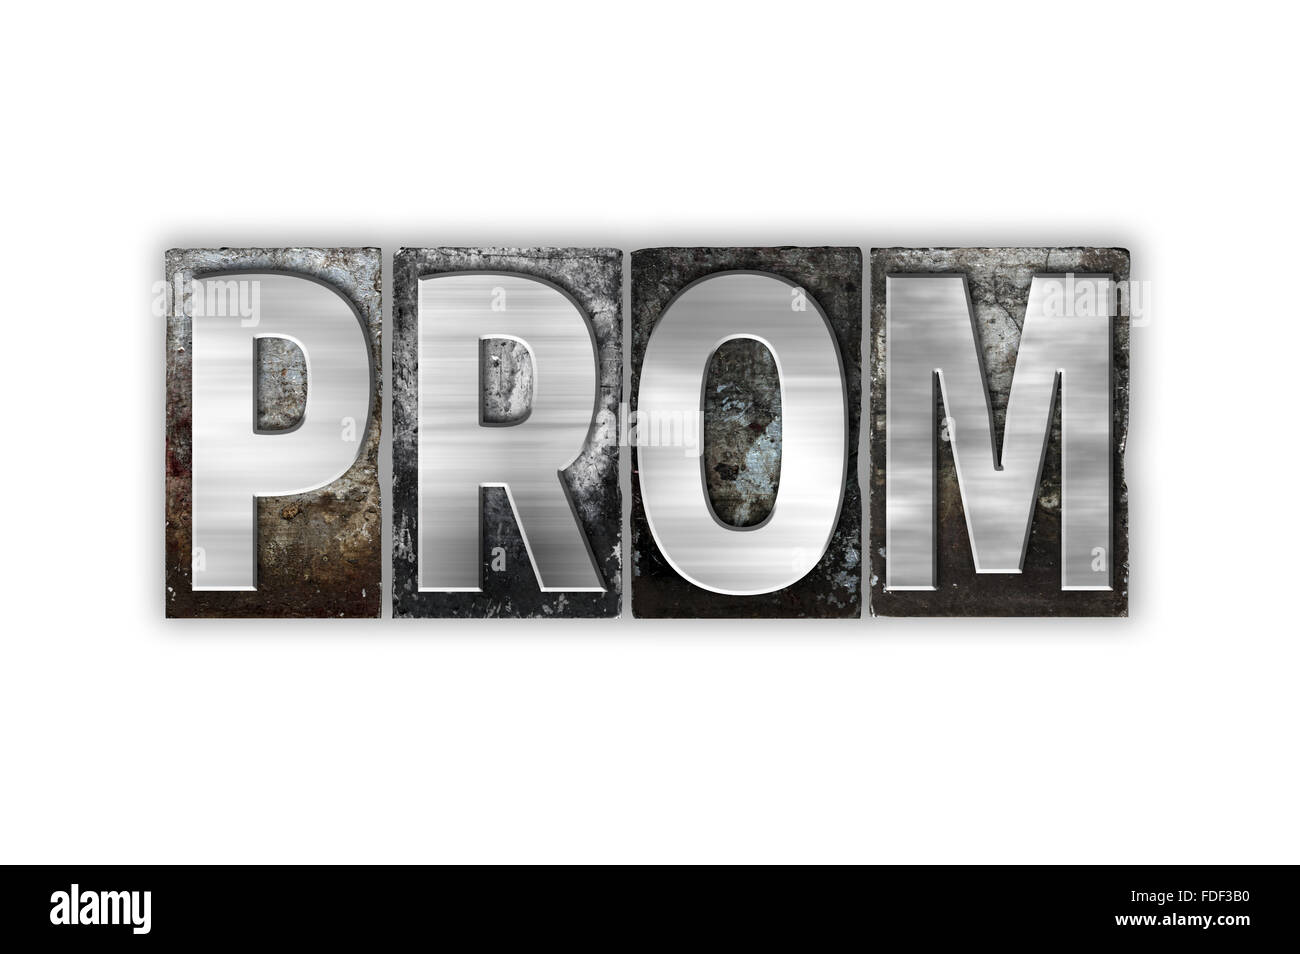 The word 'Prom' written in vintage metal letterpress type isolated on a white background. Stock Photo